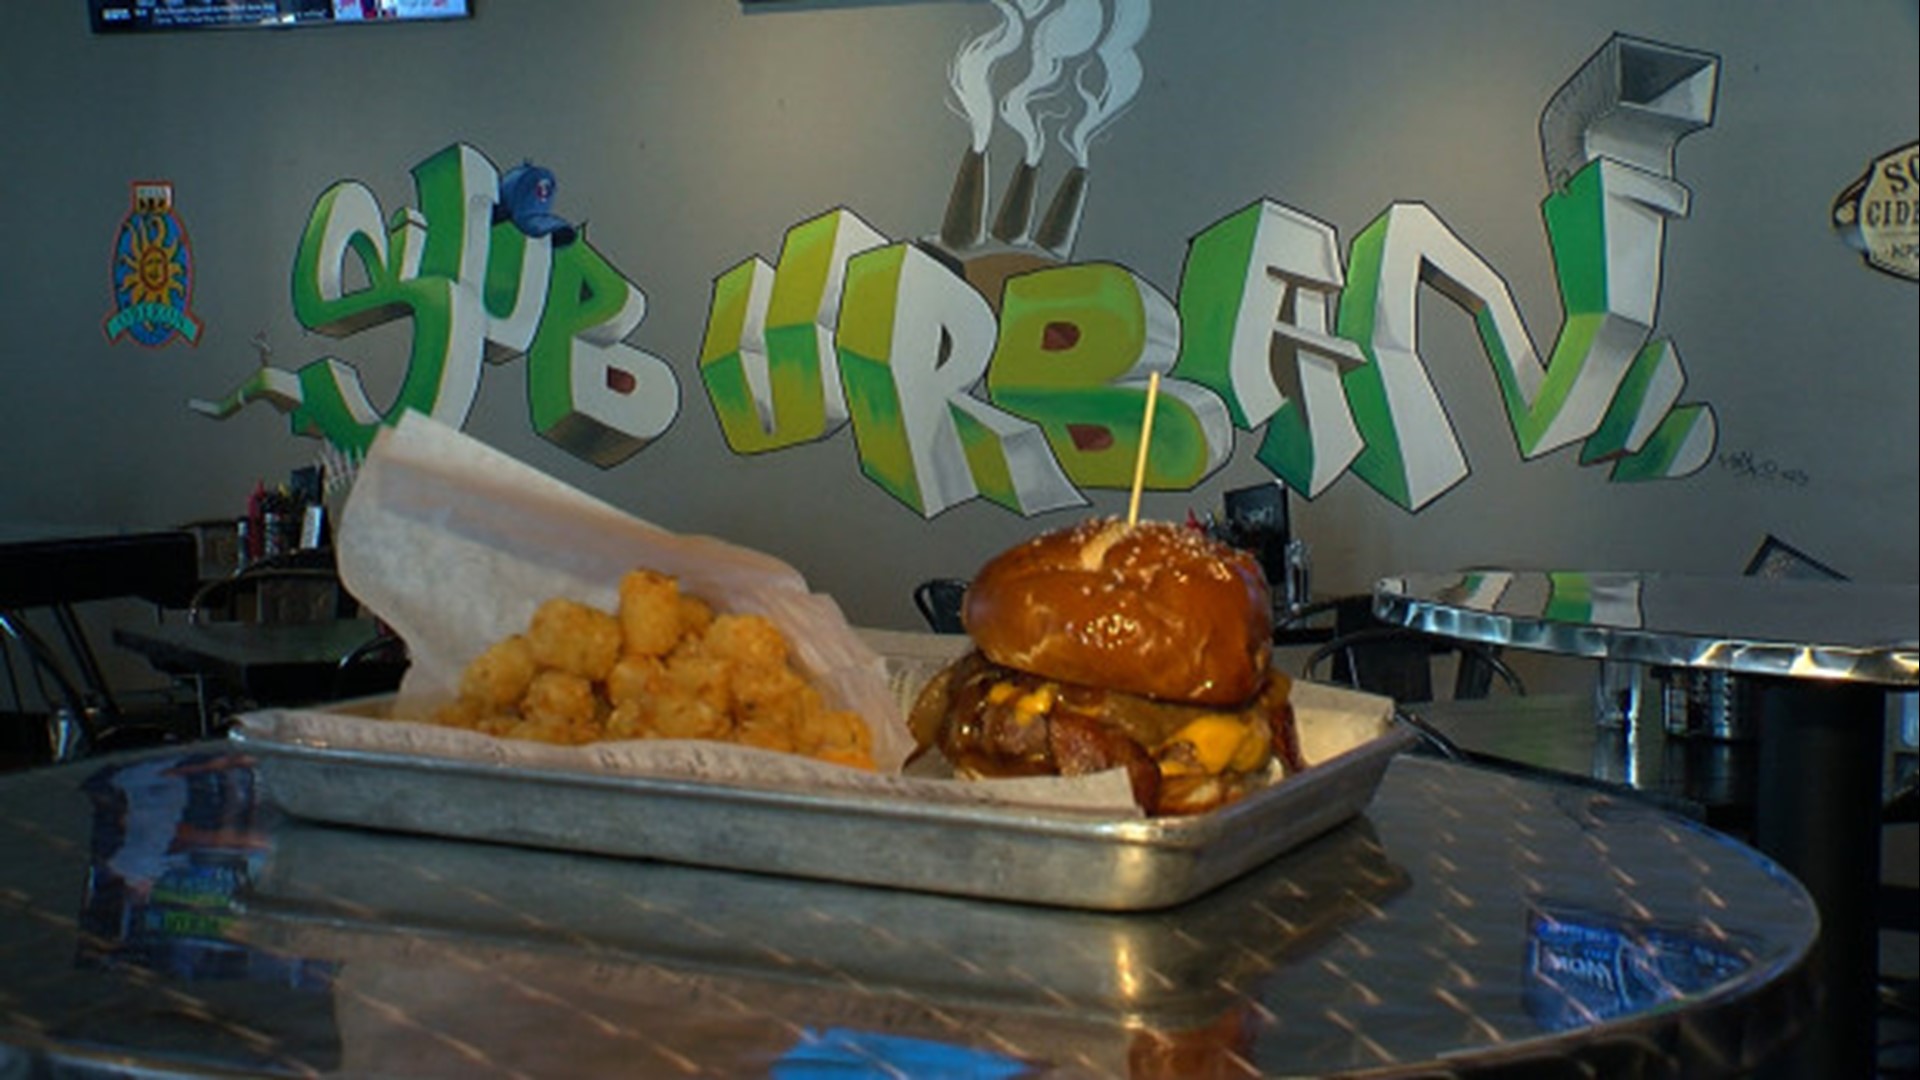 A Minneapolis restaurant claims its burger called "The Labor Inducer" has helped two moms give birth hours after eating it.